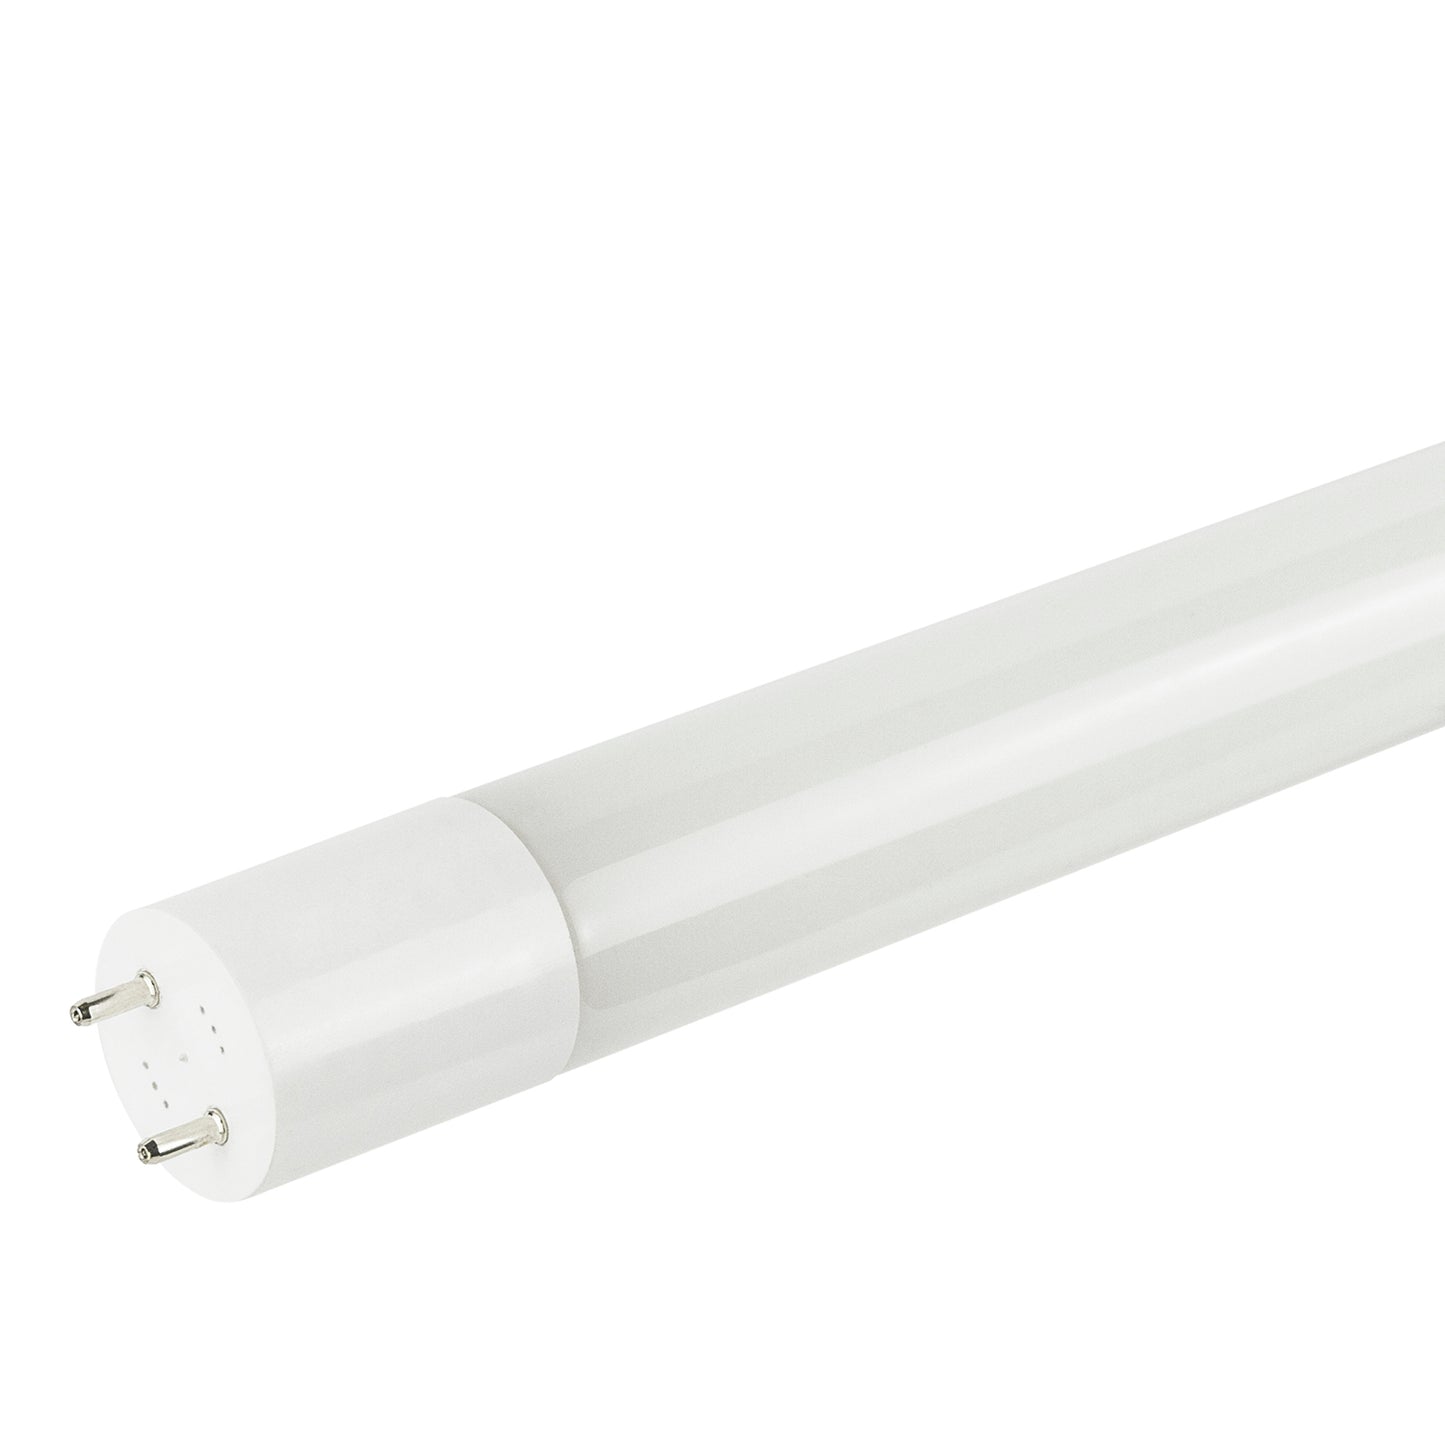 Sunlite 87972 LED T8 Plug & Play Light Tube (Type A) 3 Ft, 10 Watt (F25T8 Fluorescent Replacement) 1450 Lm, Medium G13 Base, Dual End Connection, Ballast Compatible, 5000K Super White, 10 Pack